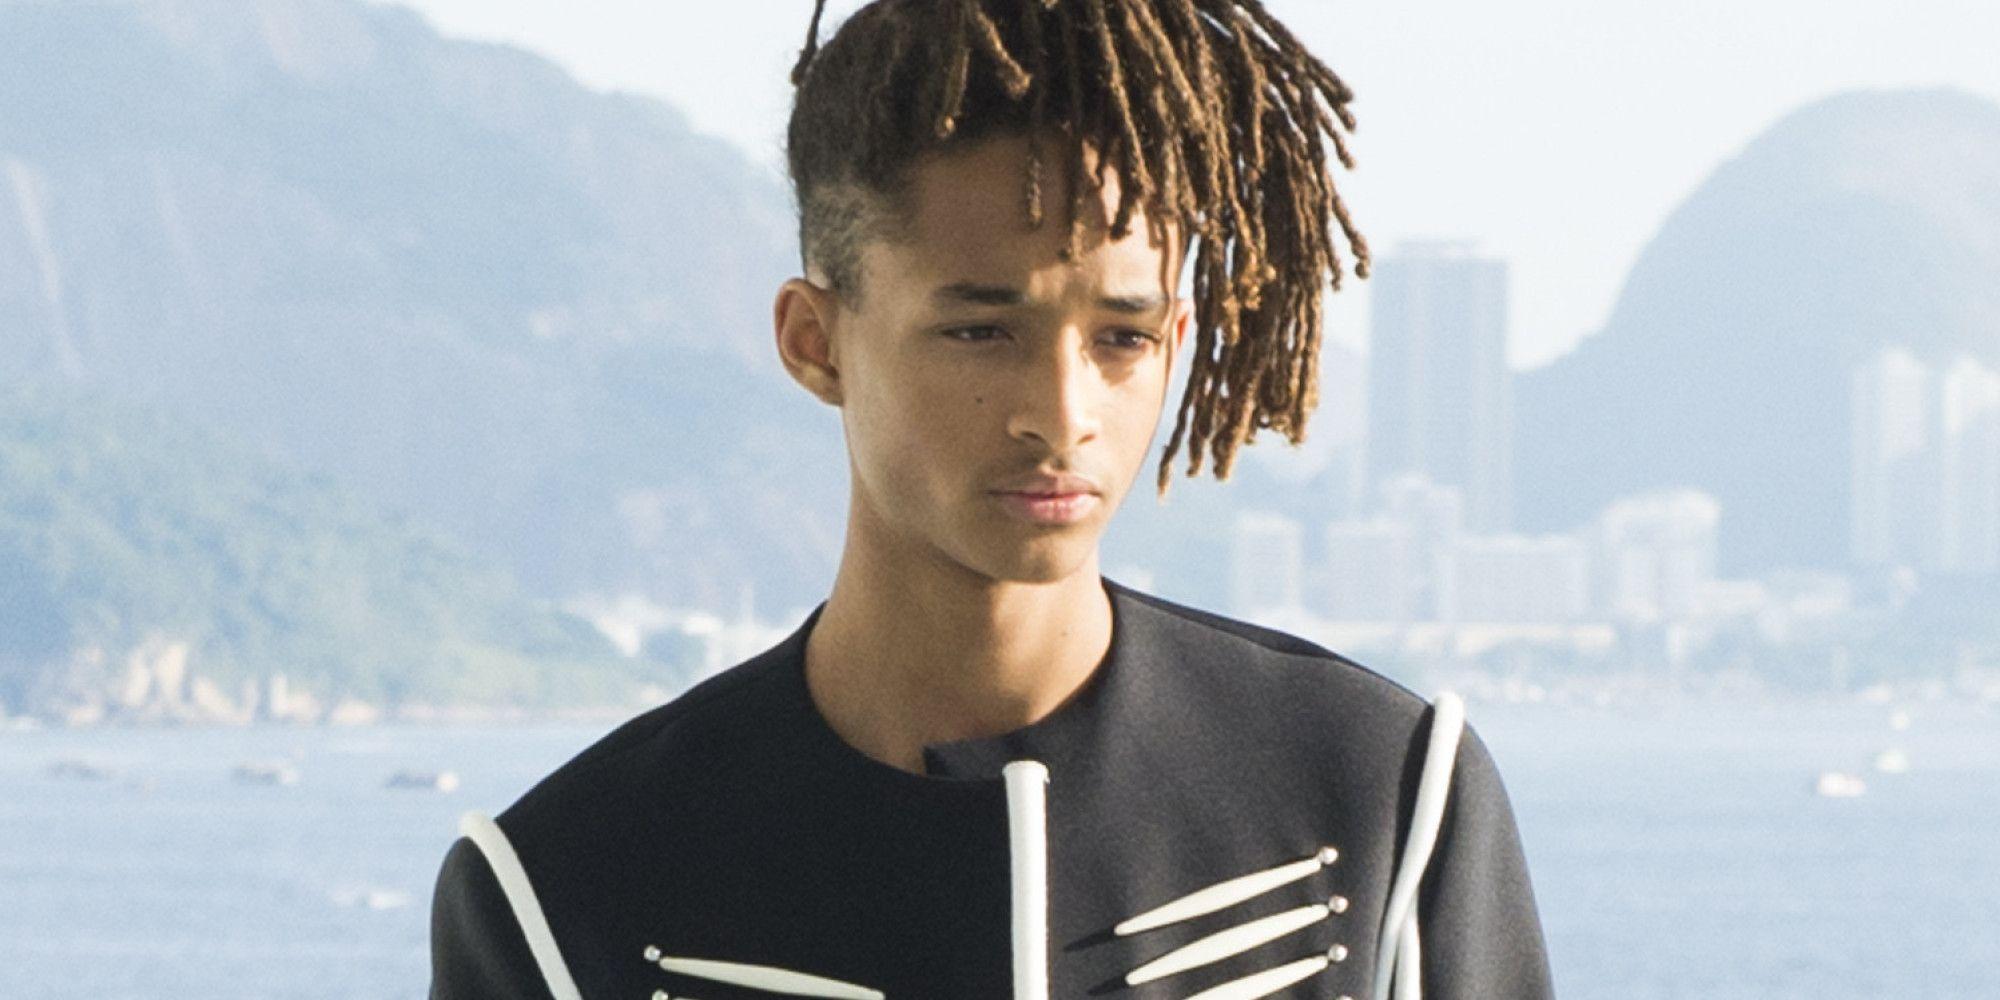 Jaden Smith Wallpaper Image Photo Picture Background